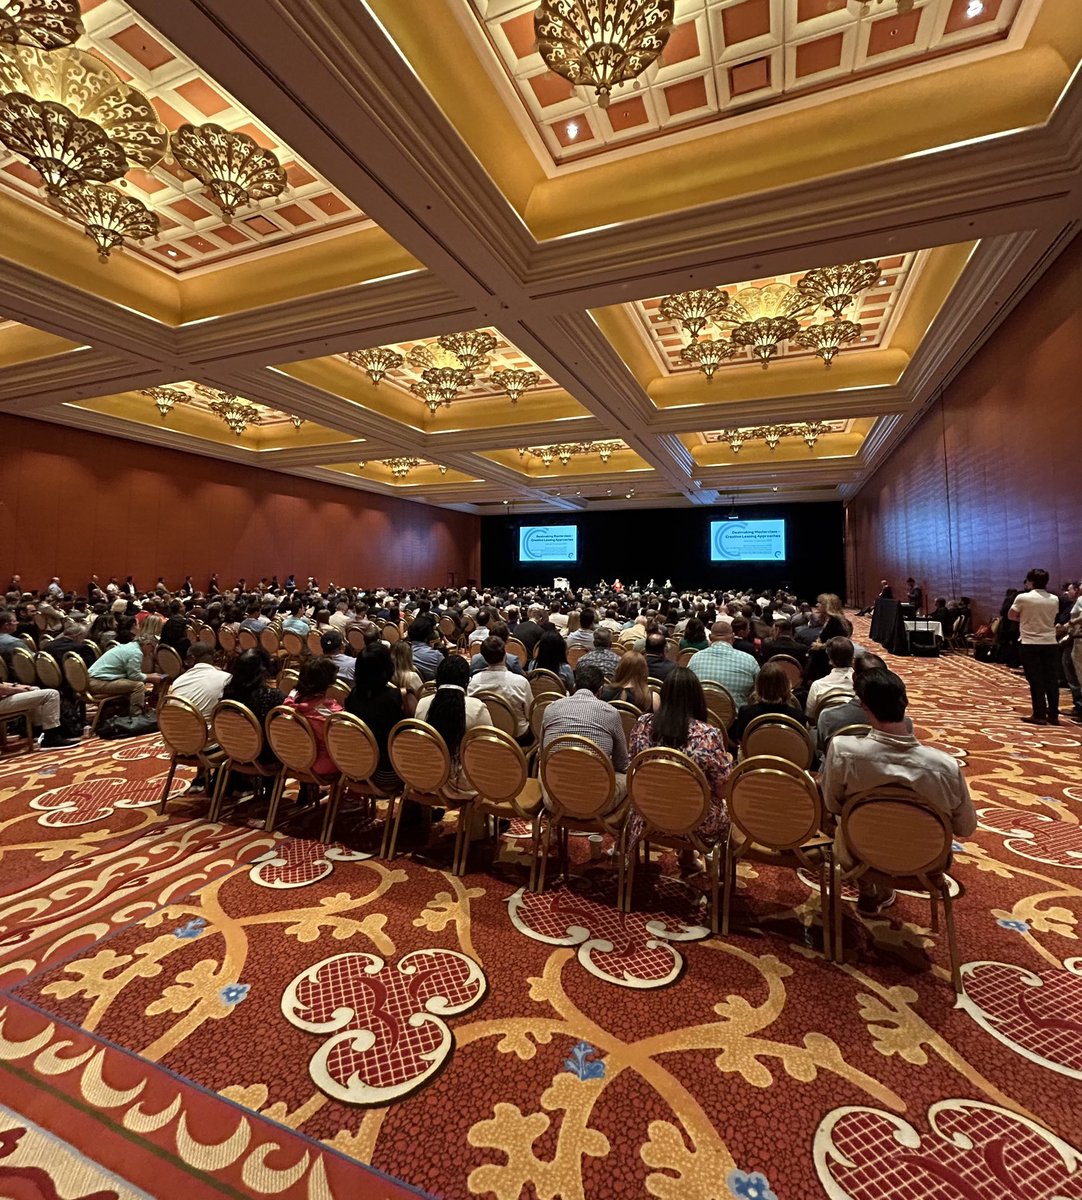 The ‘Dealmaking Masterclass – Creative Leasing Approaches’ happening now at ICSC LAS VEGAS! 

Attendees are gaining insight into what it takes to get a deal done in today’s ever-changing market.  Plus, learning about best practices, leasing trends and strategies to stay ahead of